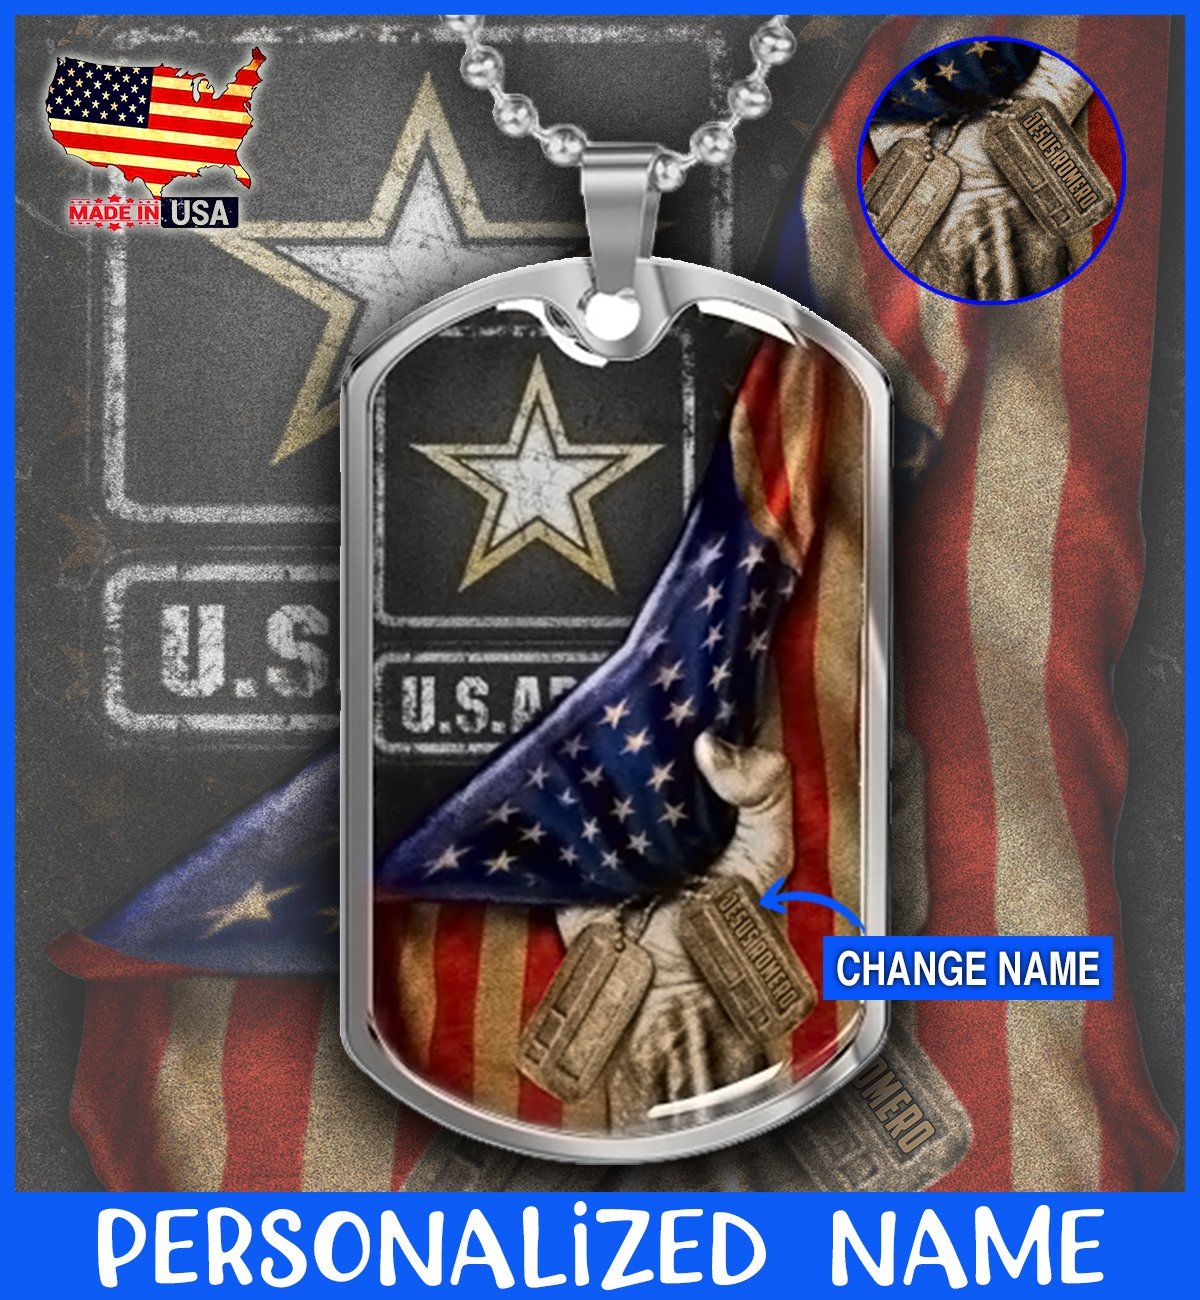 U.S. ARMY Flag Personalized Name Dog Tag Necklace - Cog Tags For Men